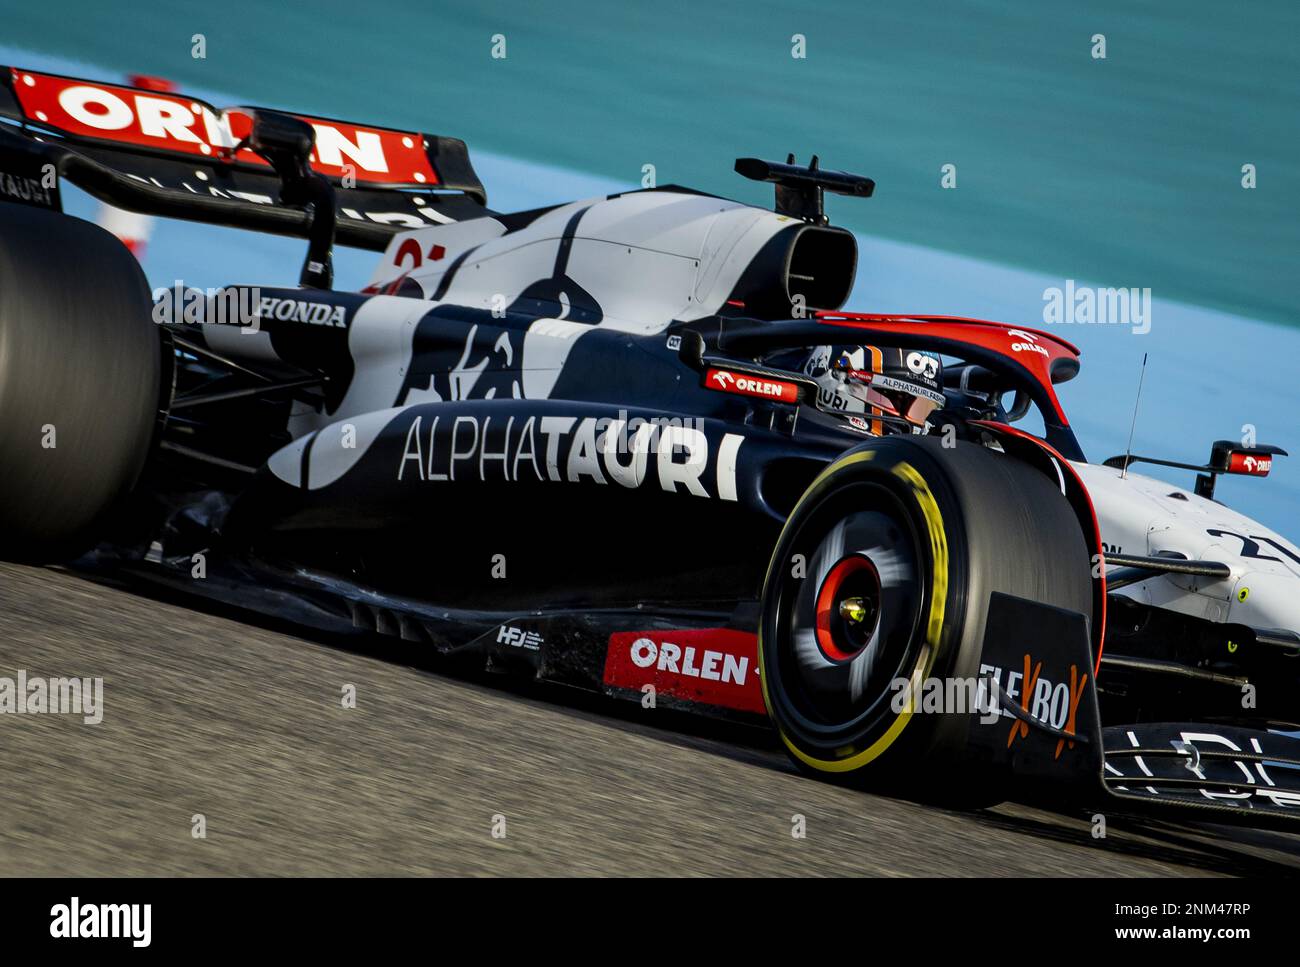 BAHRAIN - Nyck de Vries (AlphaTauri) during the second day of testing at the Bahrain International Circuit ahead of the start of the Formula 1 season. ANP SEM VAN DER WAL netherlands out - belgium out Credit: ANP/Alamy Live News Stock Photo